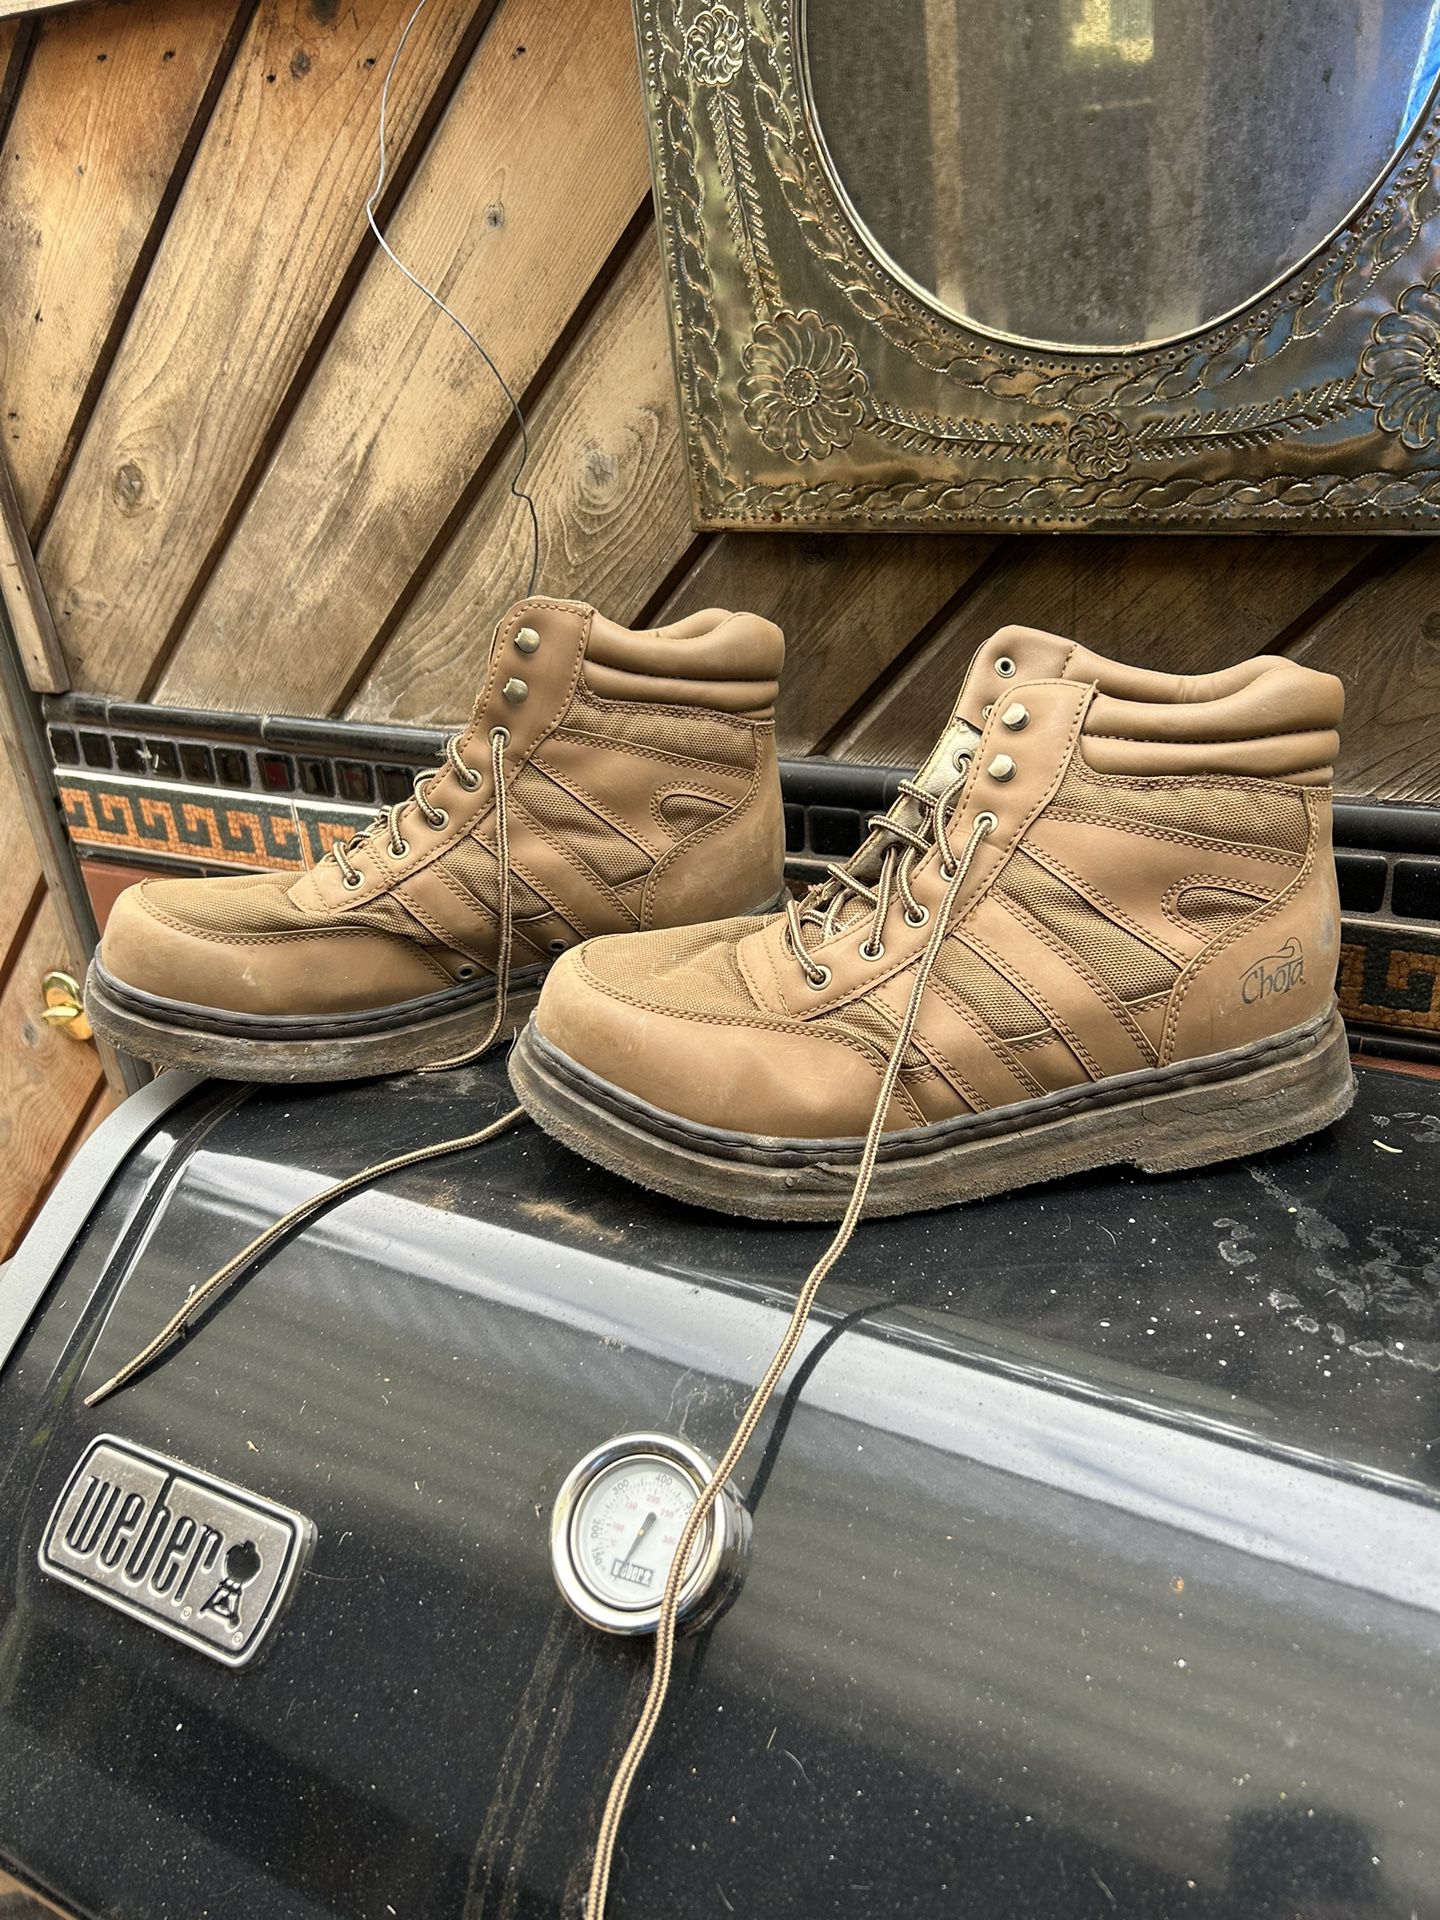 Fly Fishing Wader Boots for Sale in San Diego, CA - OfferUp